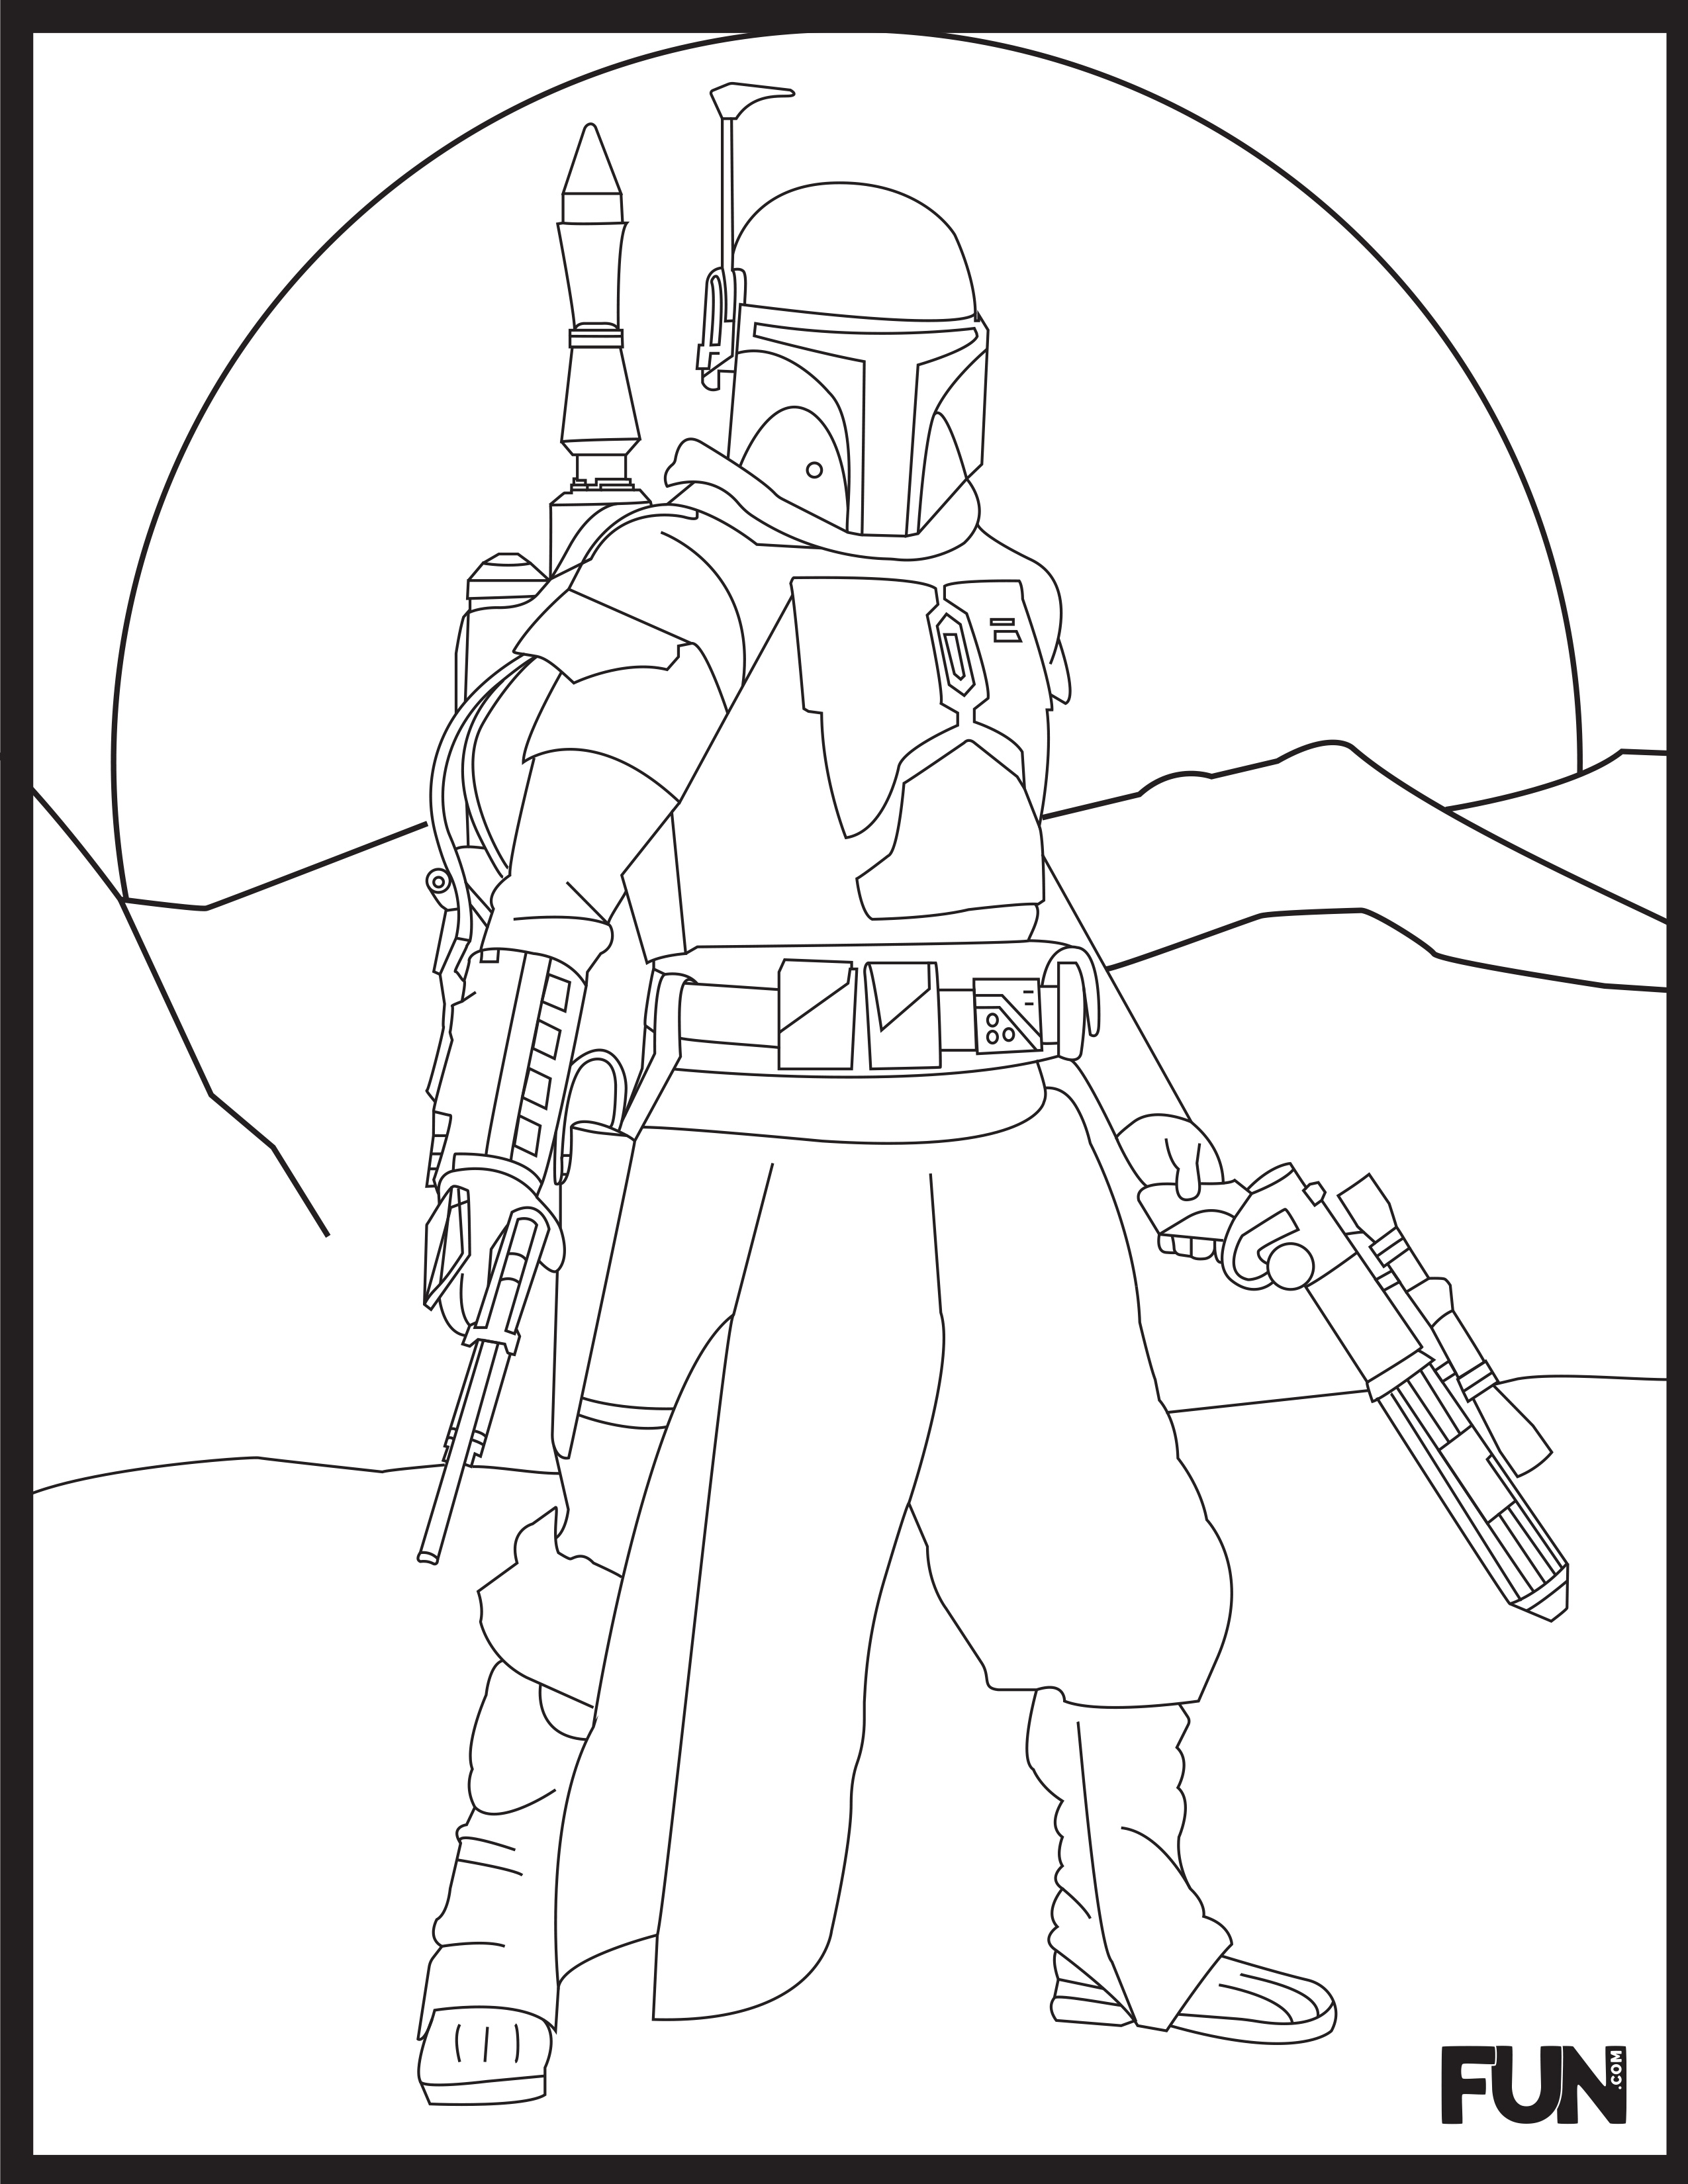 Star wars coloring pages and bingo sheets printables